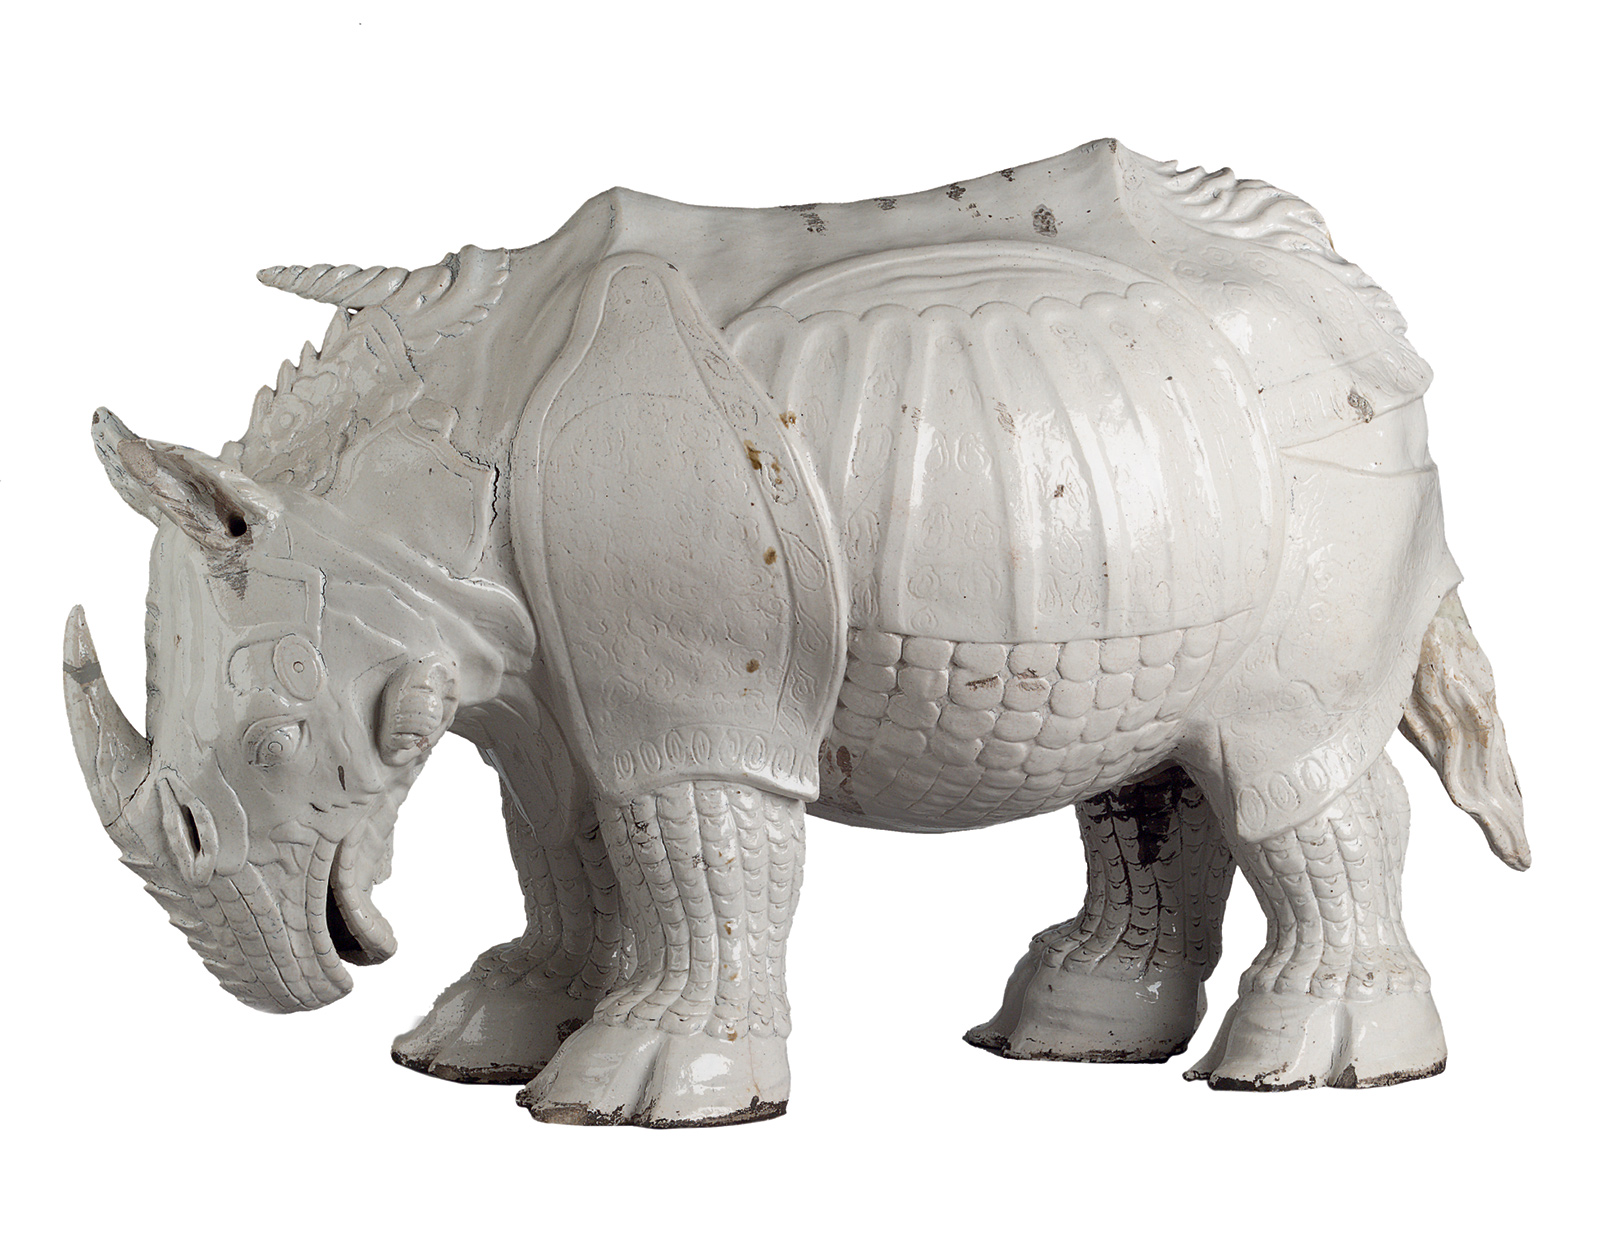 ‘Rhinoceros’; Meissen porcelain based on a sculpture by Johann Gottlieb Kirchner, 1730; from Neil MacGregor’s Germany: Memories of a Nation